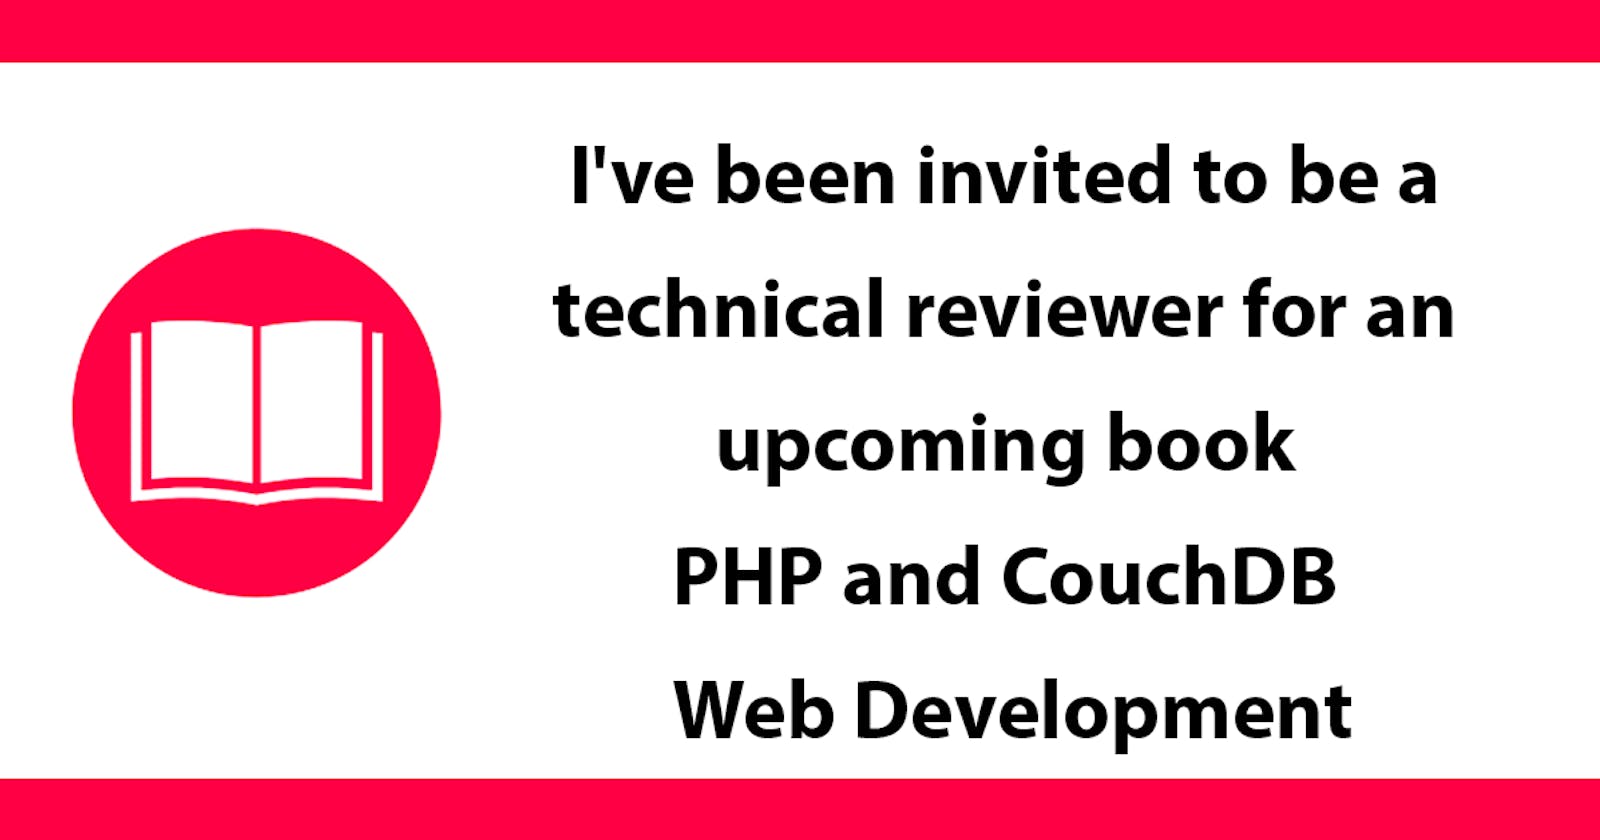 I've been invited to be a technical reviewer for an upcoming book (PHP and CouchDB Web Development) from Packt publishing.